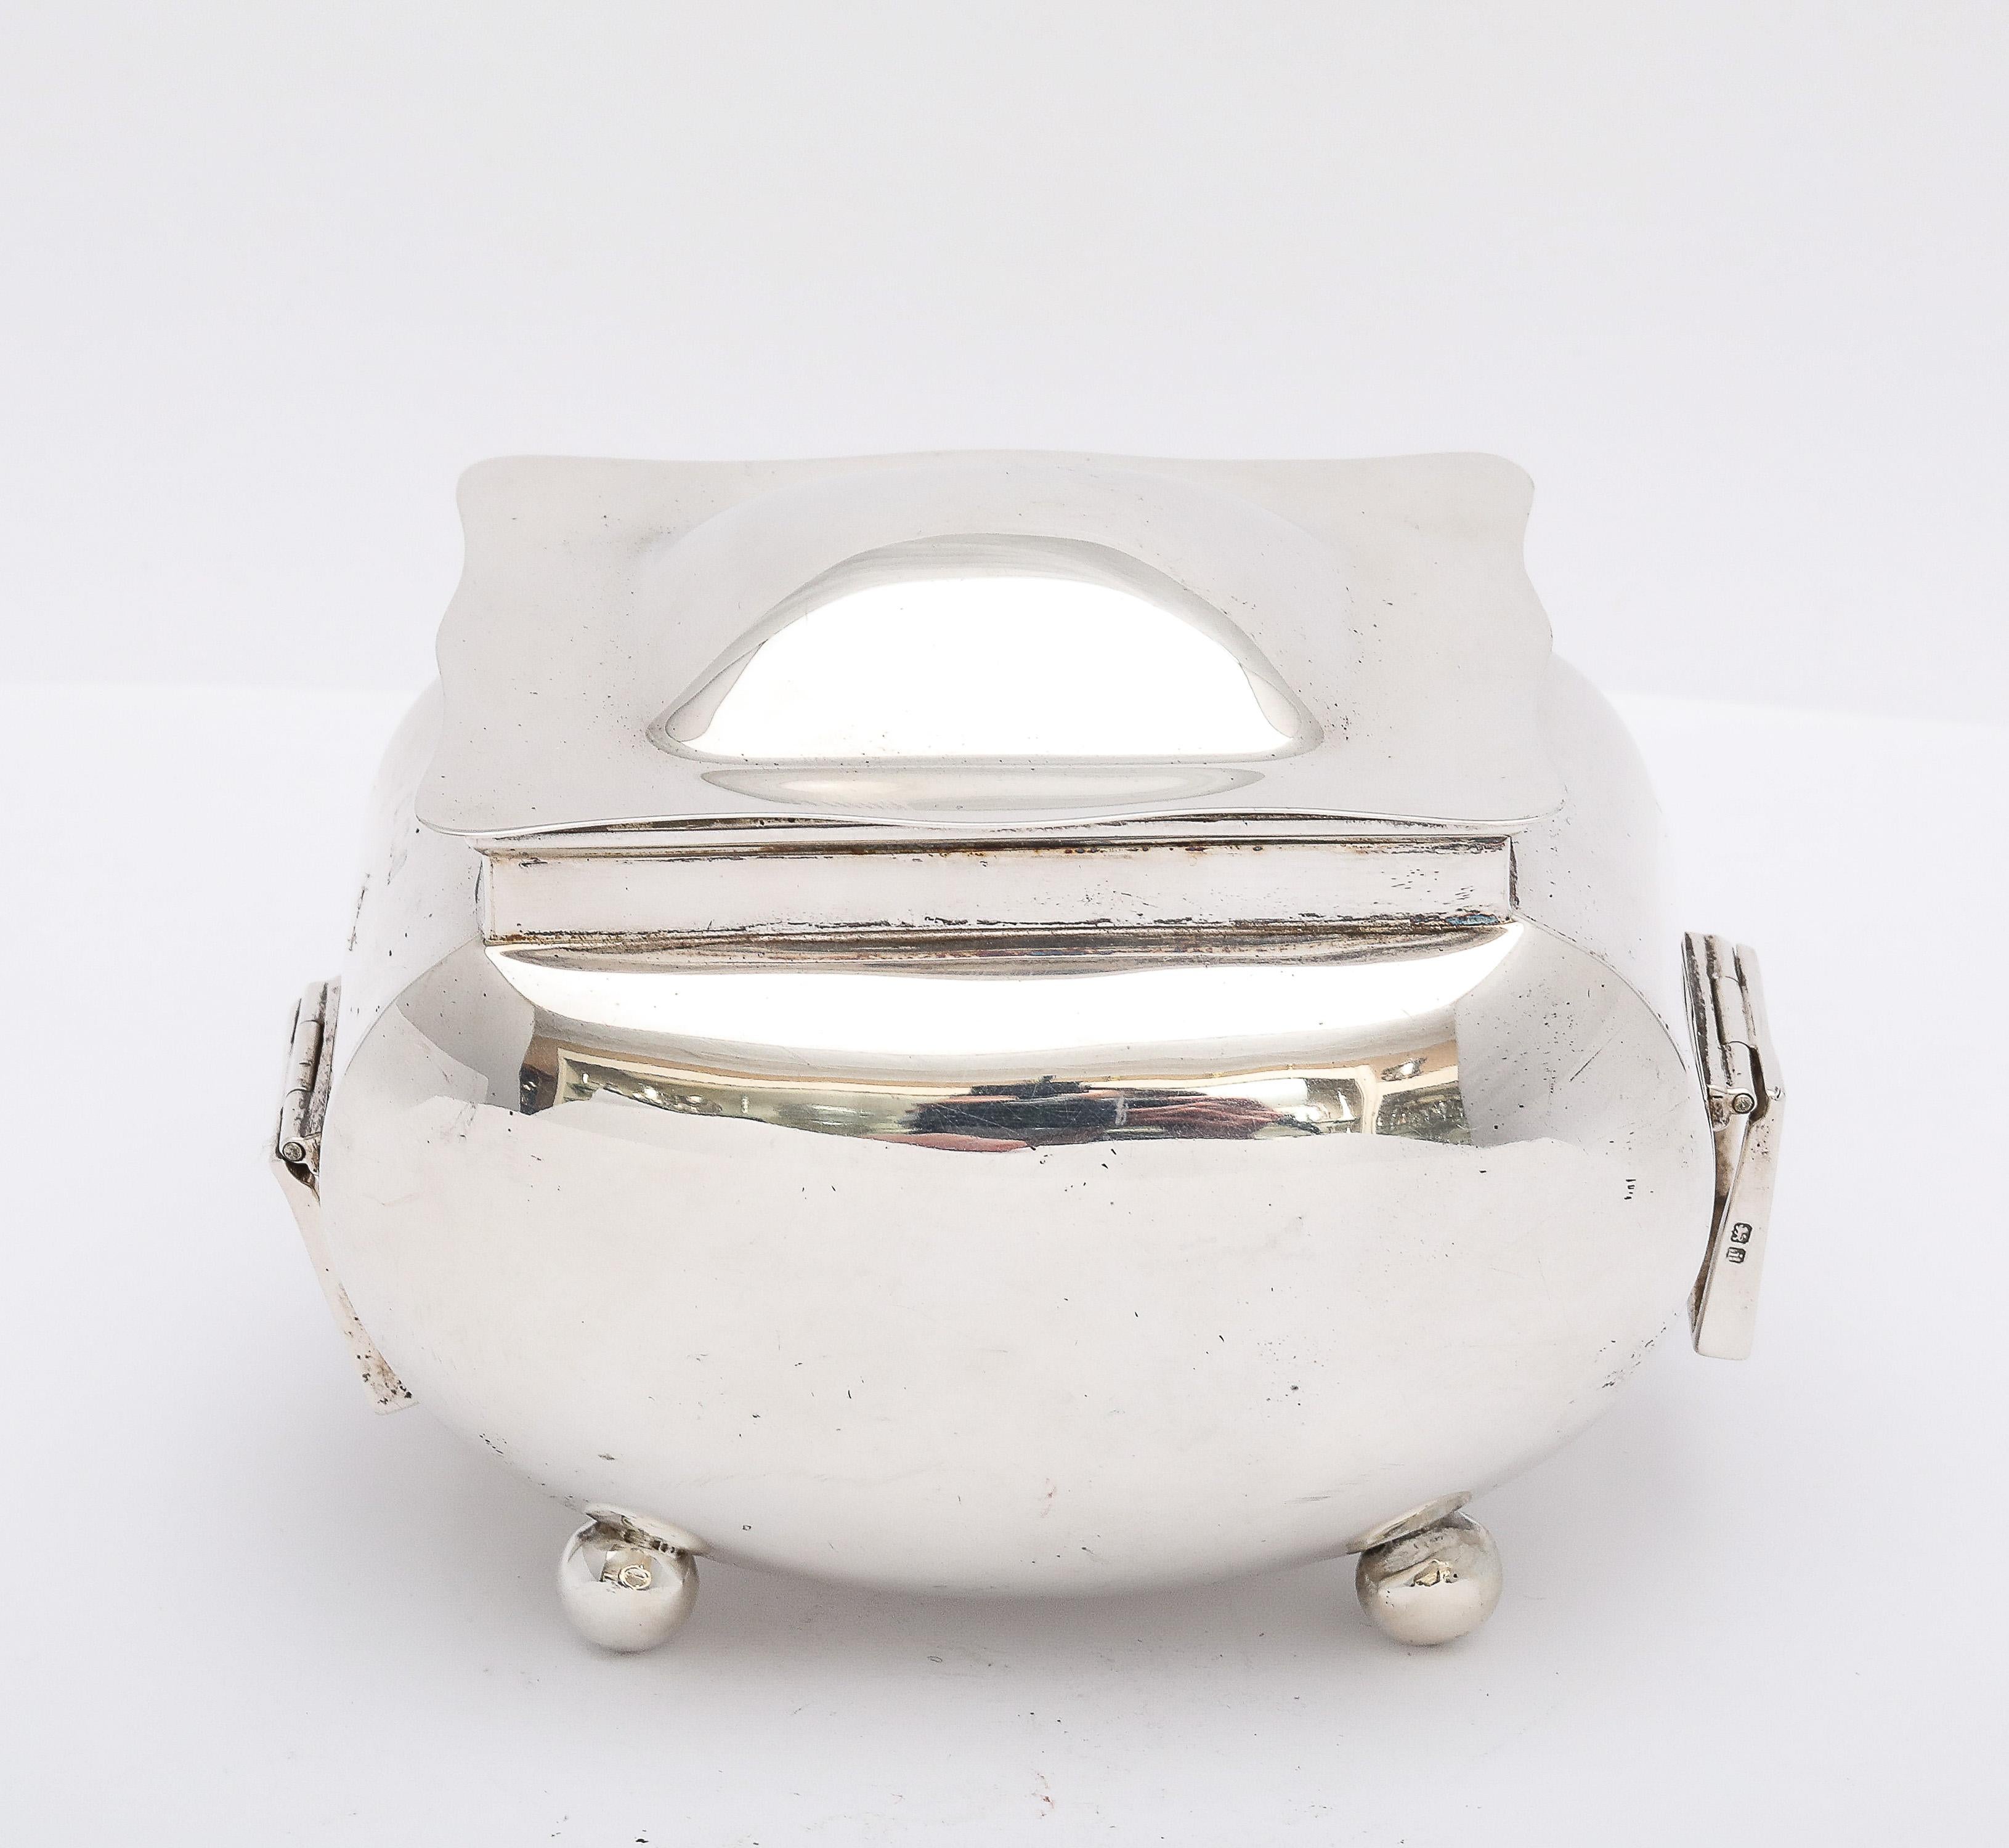 Edwardian Period, sterling silver tea caddy on ball feet, and having a hinged lid and hinged, movable handles. Lovely, clean lines. Measures 3 inches high (at highest point)  x approximately 4 1/4 inches wide (from outer edge of each hinged, movable